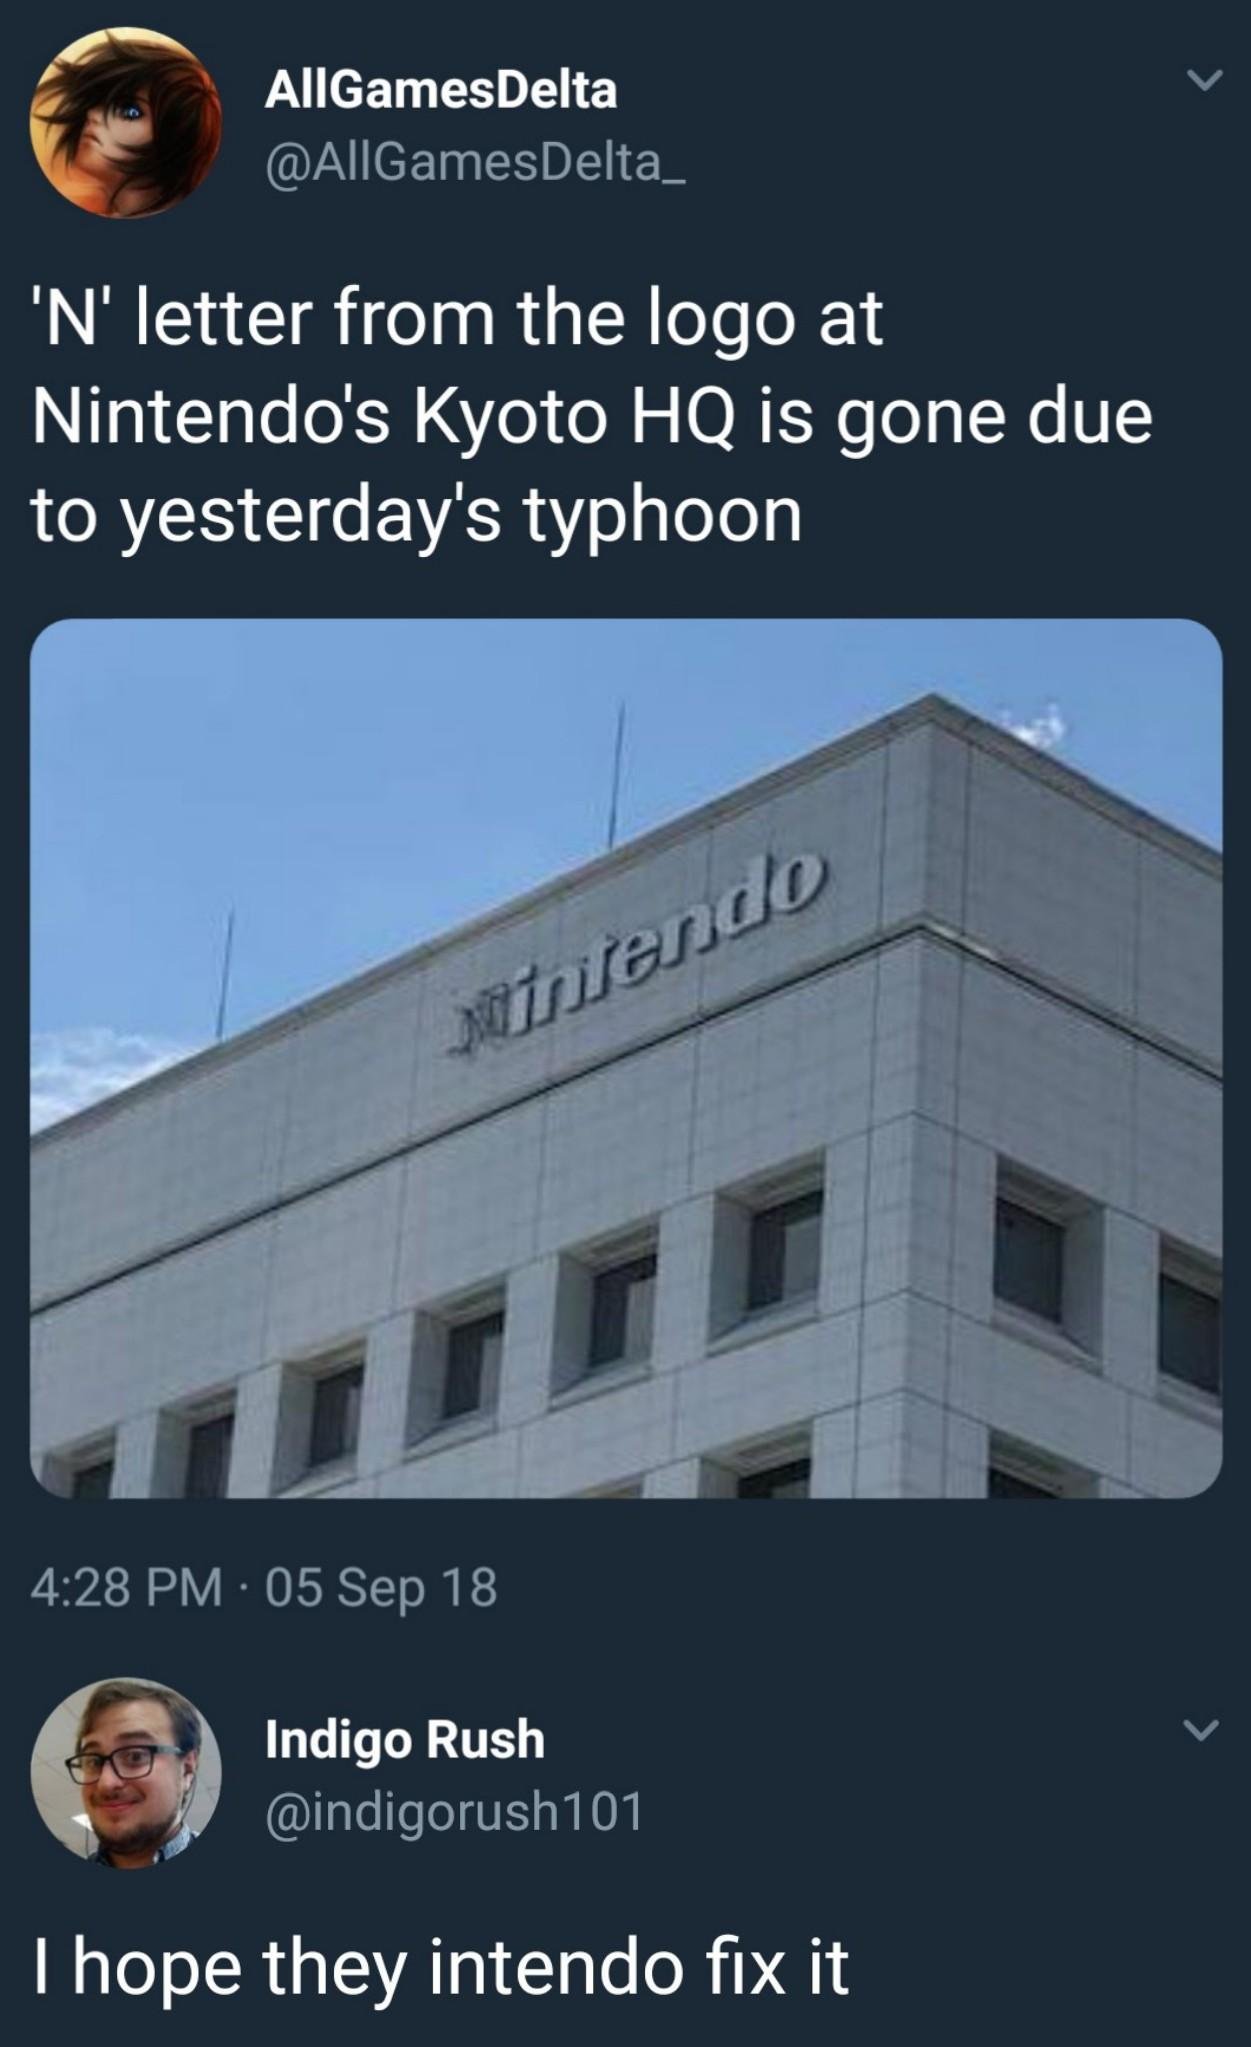 memes - nintendo without the n - AllGamesDelta 'N' letter from the logo at Nintendo's Kyoto Hq is gone due to yesterday's typhoon Minitendo 05 Sep 18 Indigo Rush Thope they intendo fix it